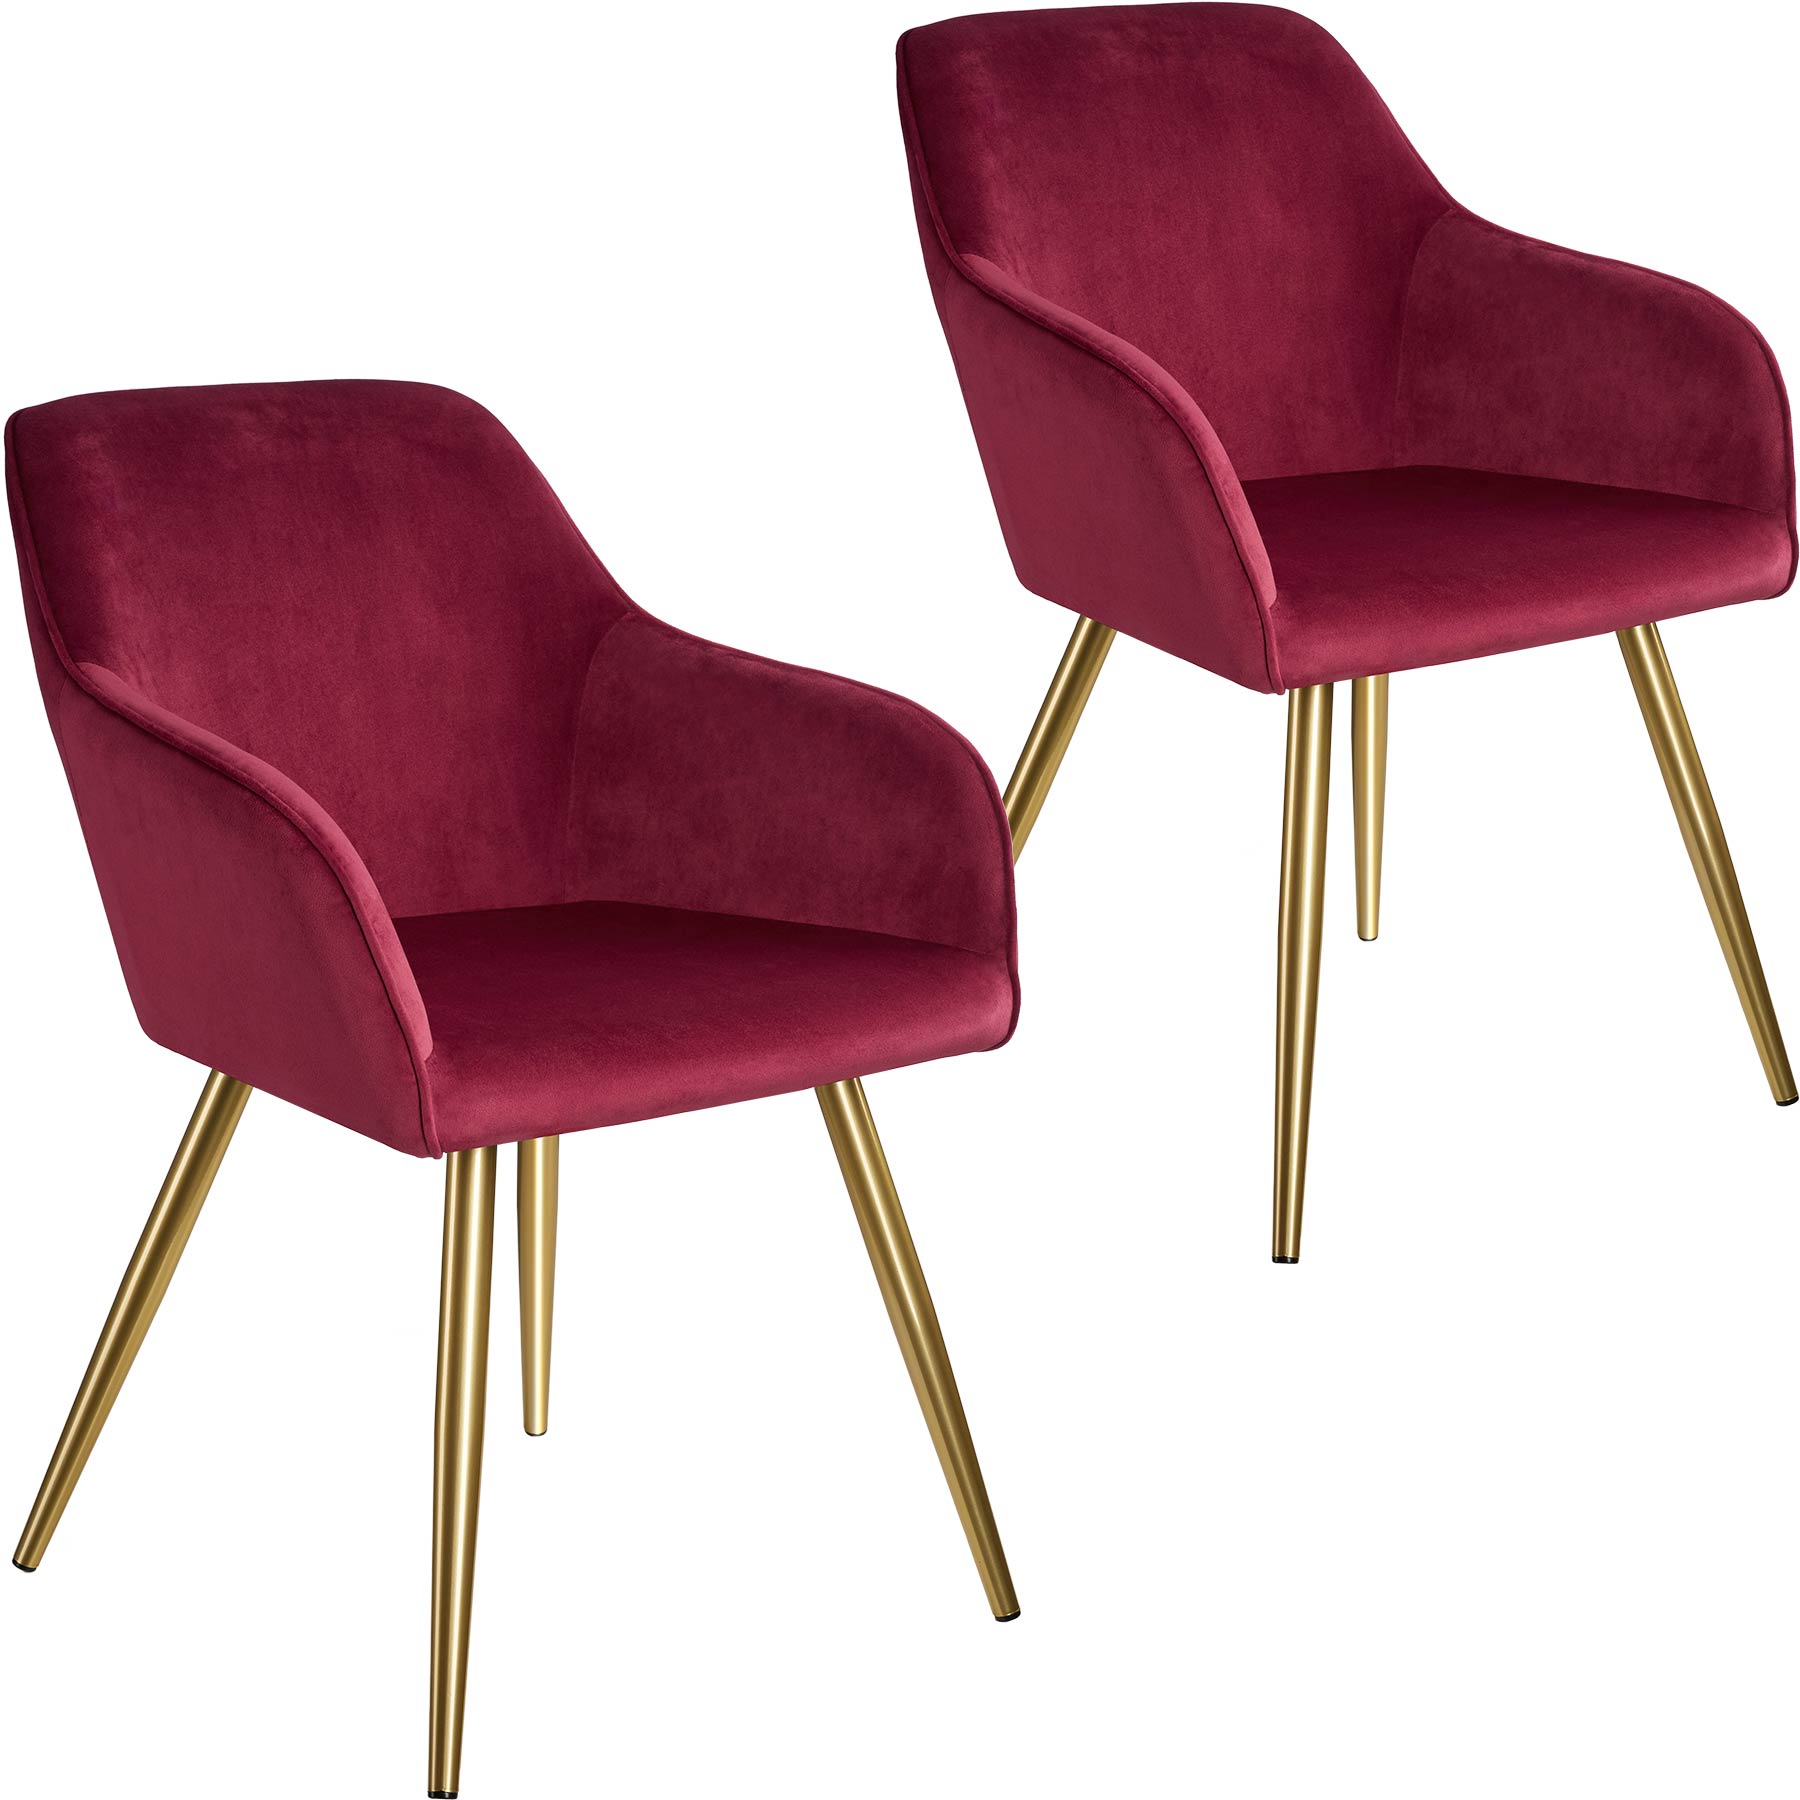 2 Chaises MARILYN Effet Velours Style Scandinave bordeaux/or